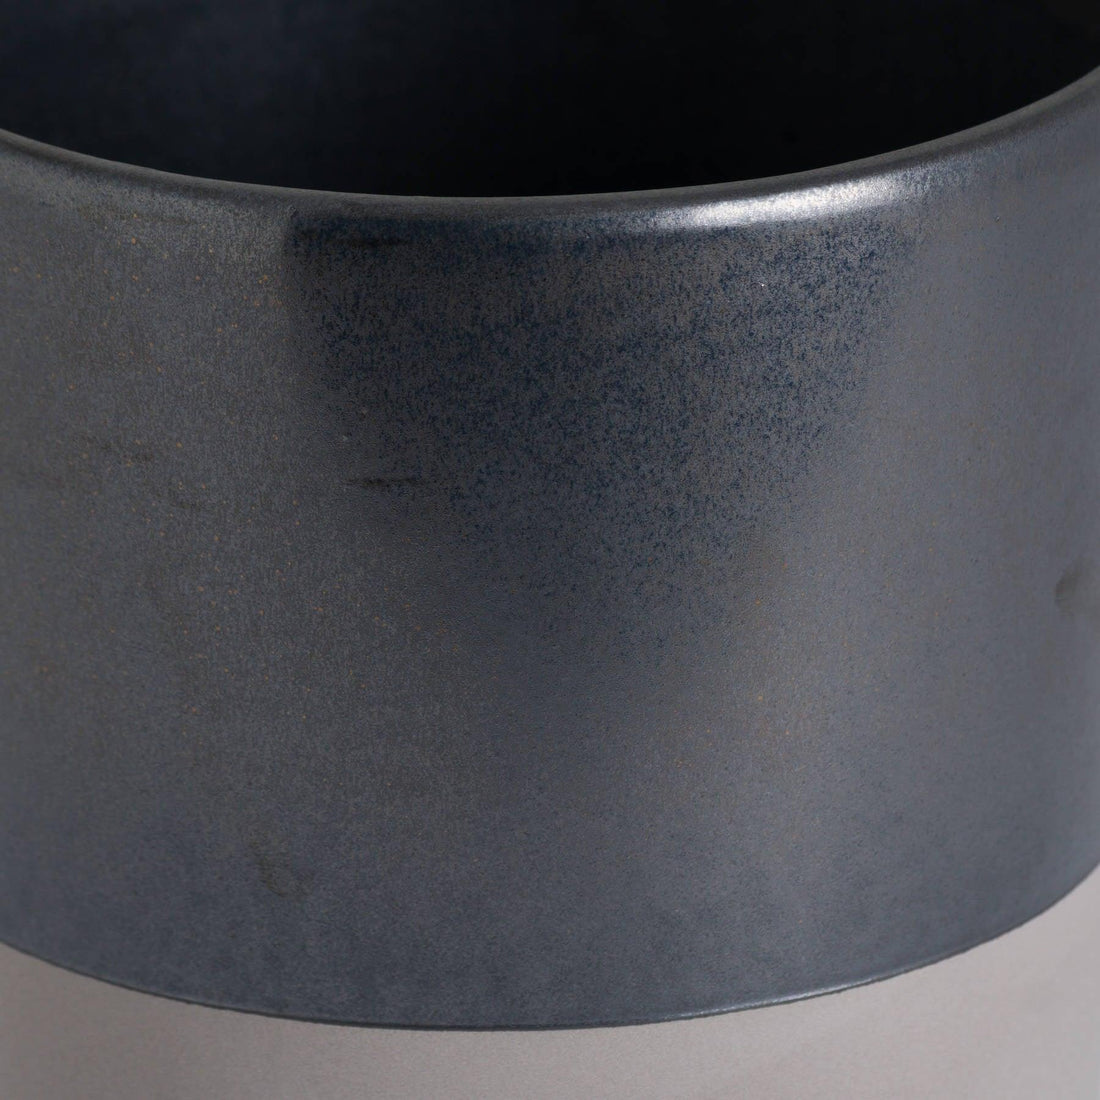 Large Metallic Grey Ceramic Planter - £34.95 - Gifts & Accessories > Kitchen And Tableware > Jugs & Bowls 